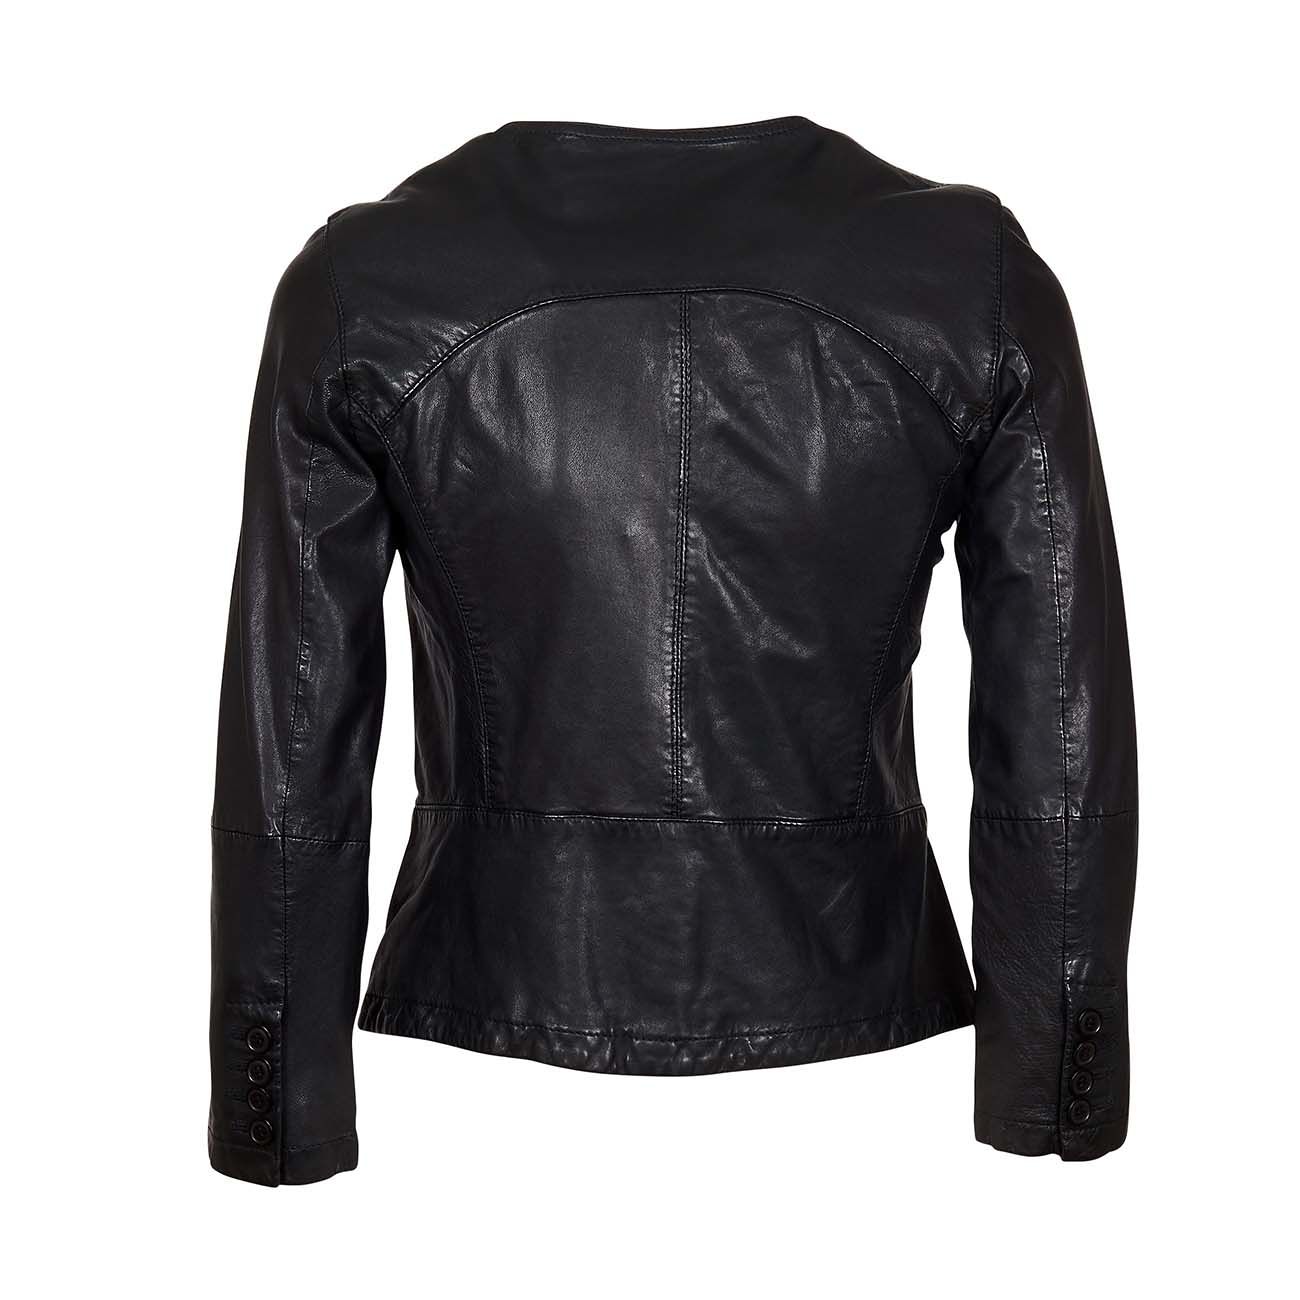 BULLY CHANEL LEATHER JACKET Woman Black